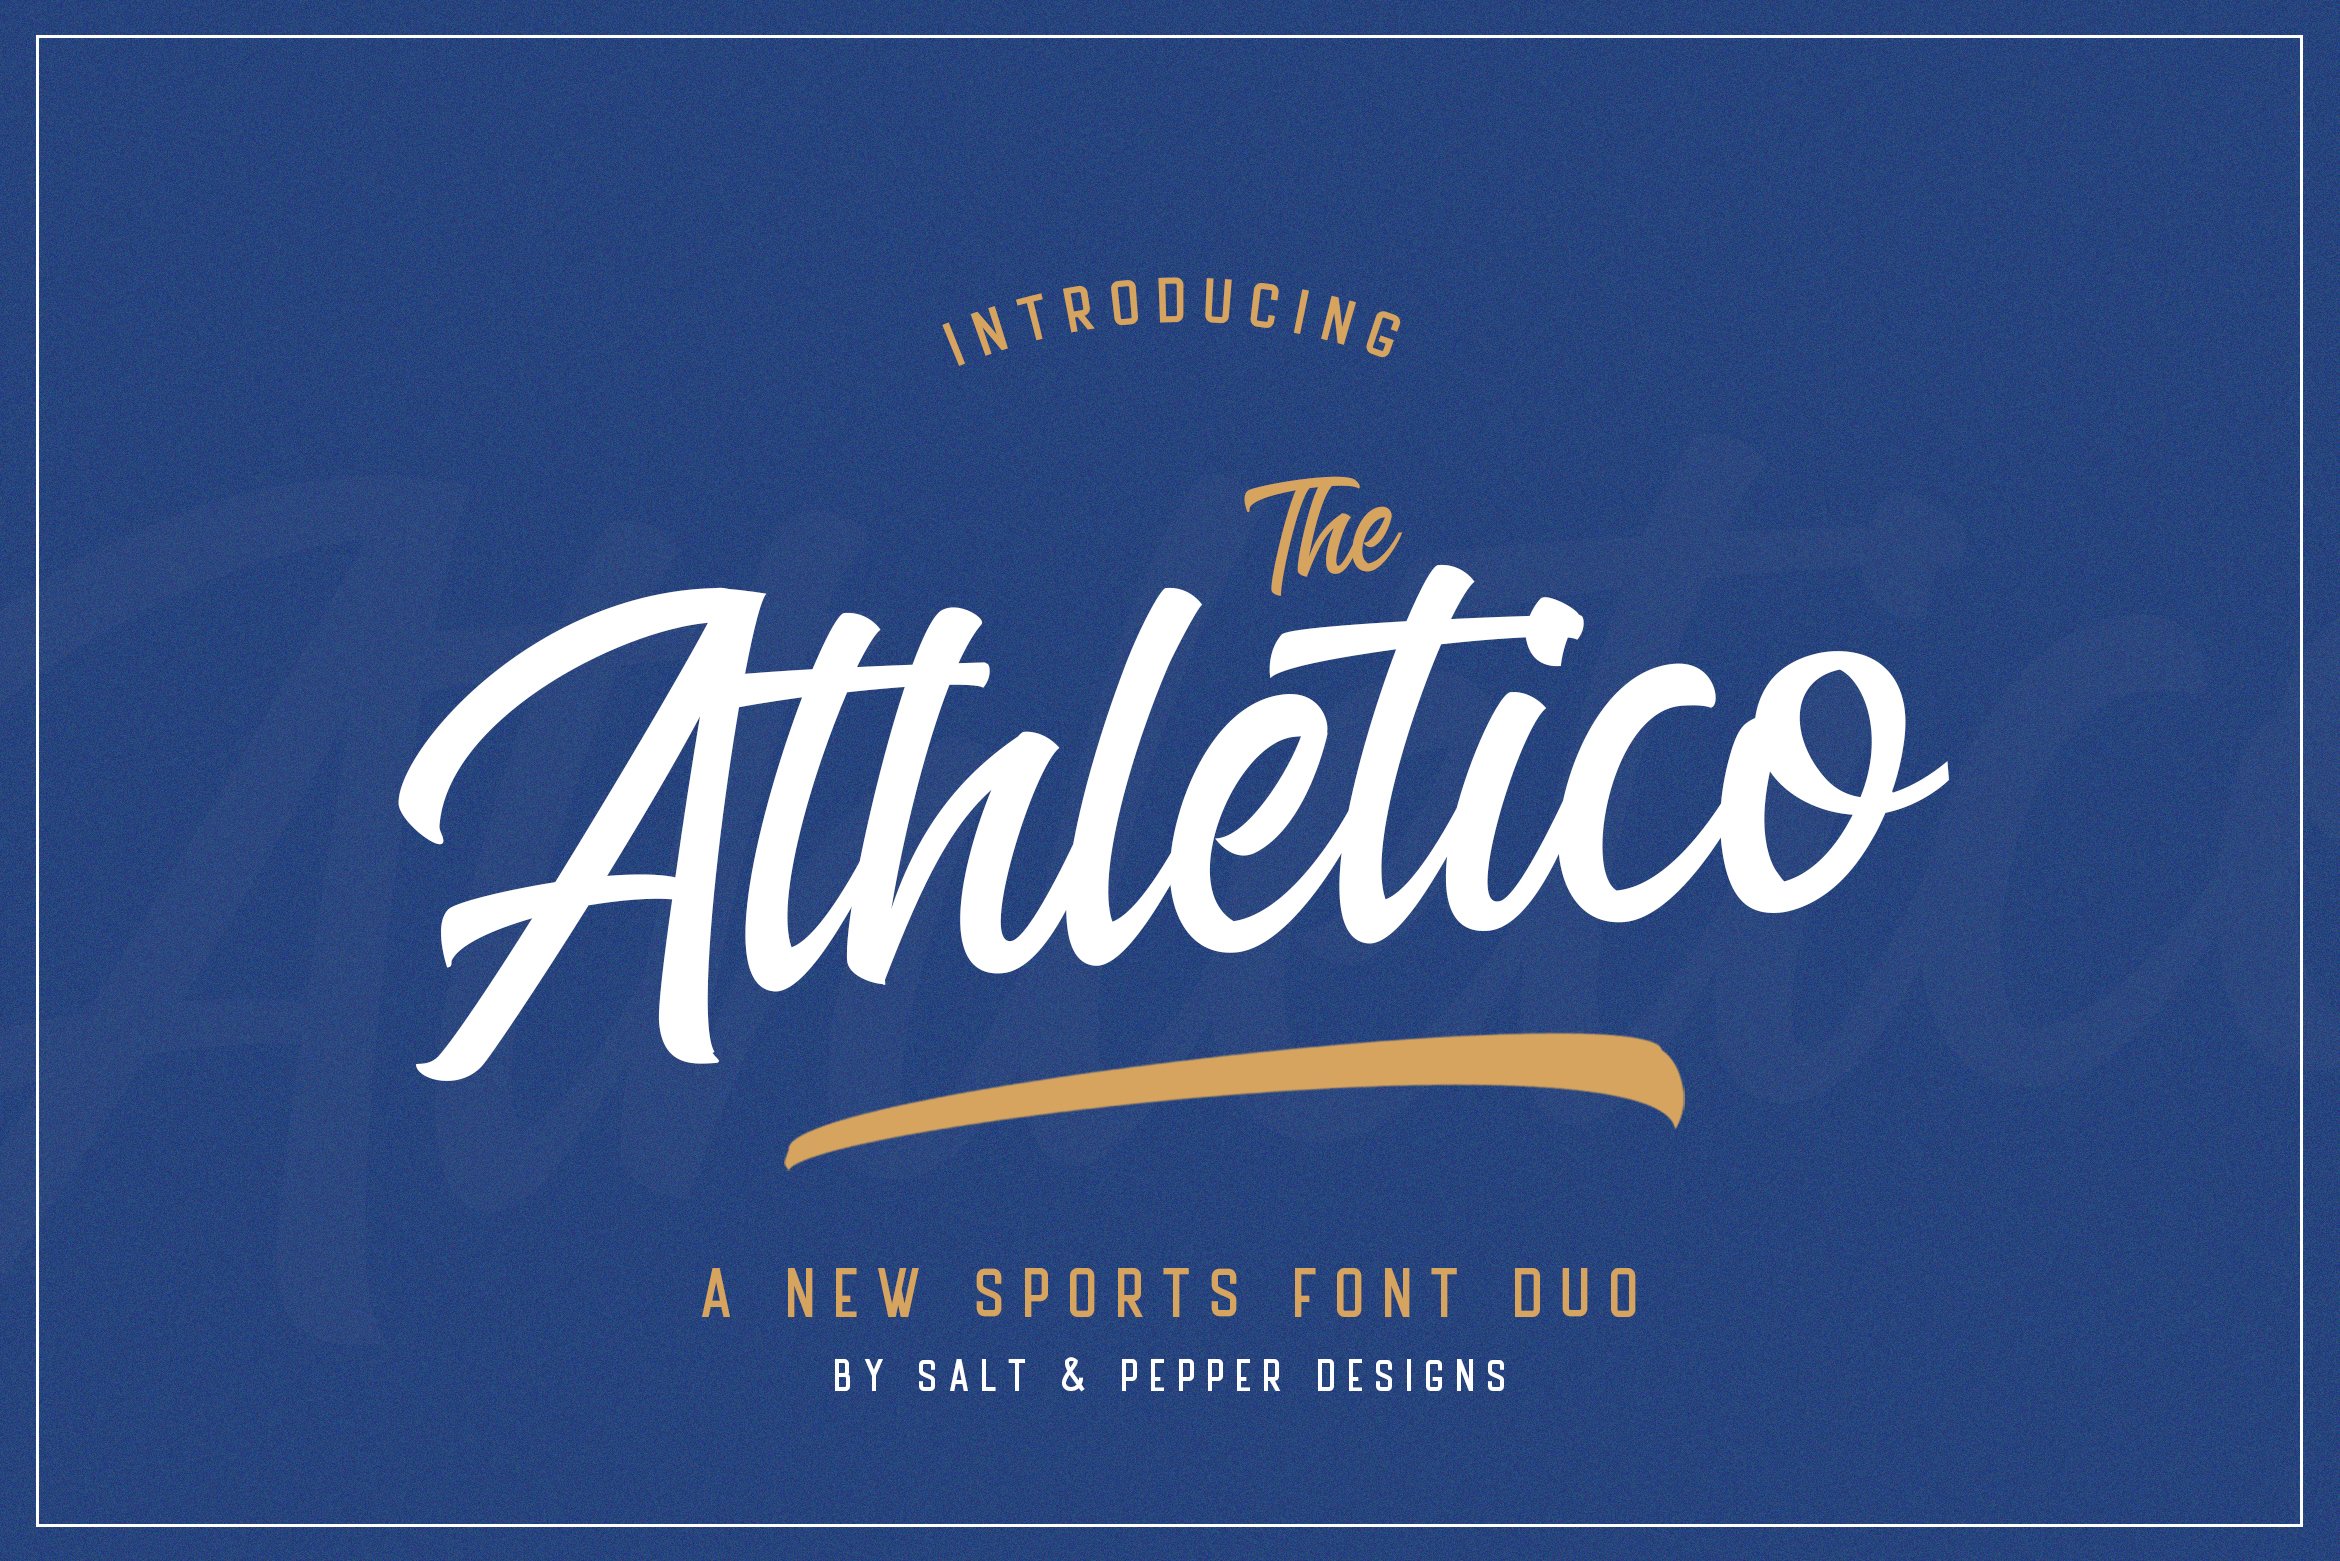 The Athletico Font Duo cover image.